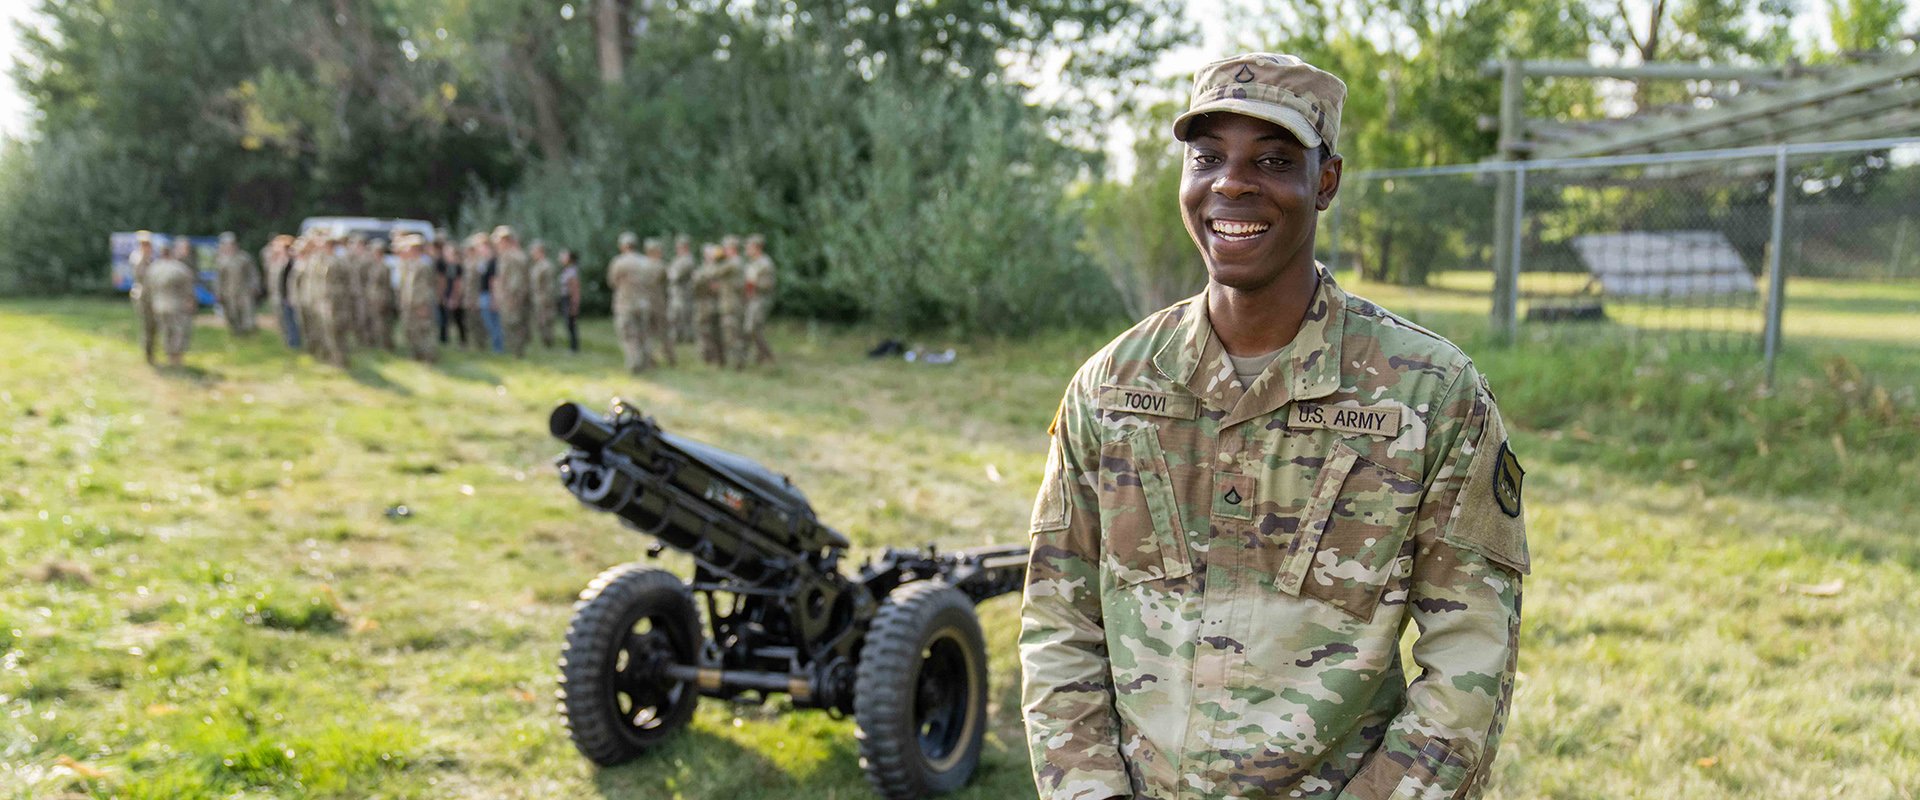 Student from the Army posing for the camera during training